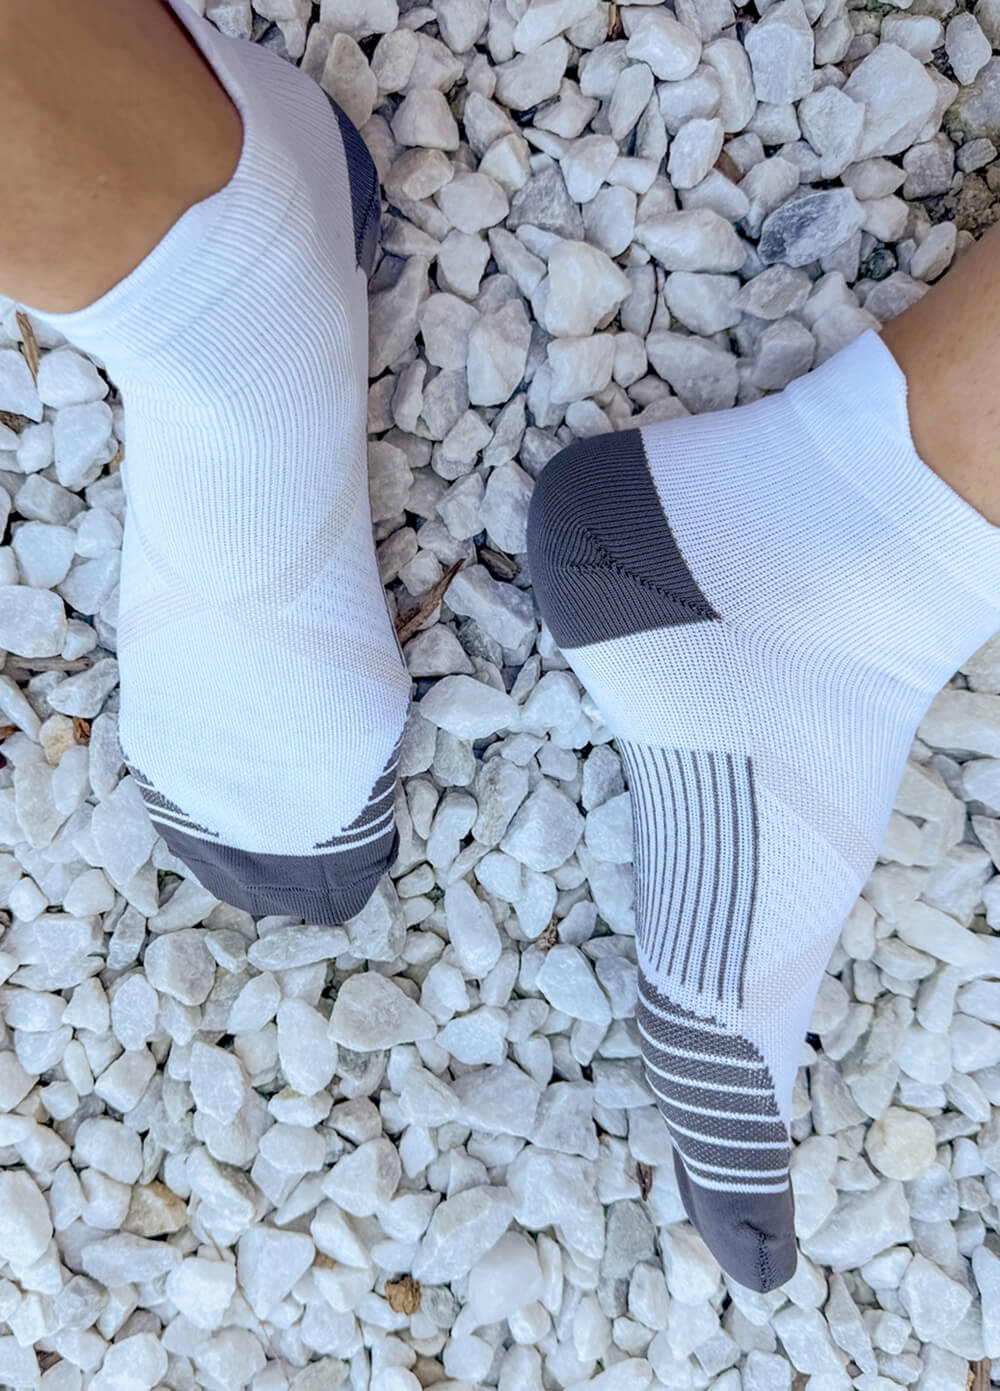 Mama Sox - Propel Sports Compression Ankle Socks in White